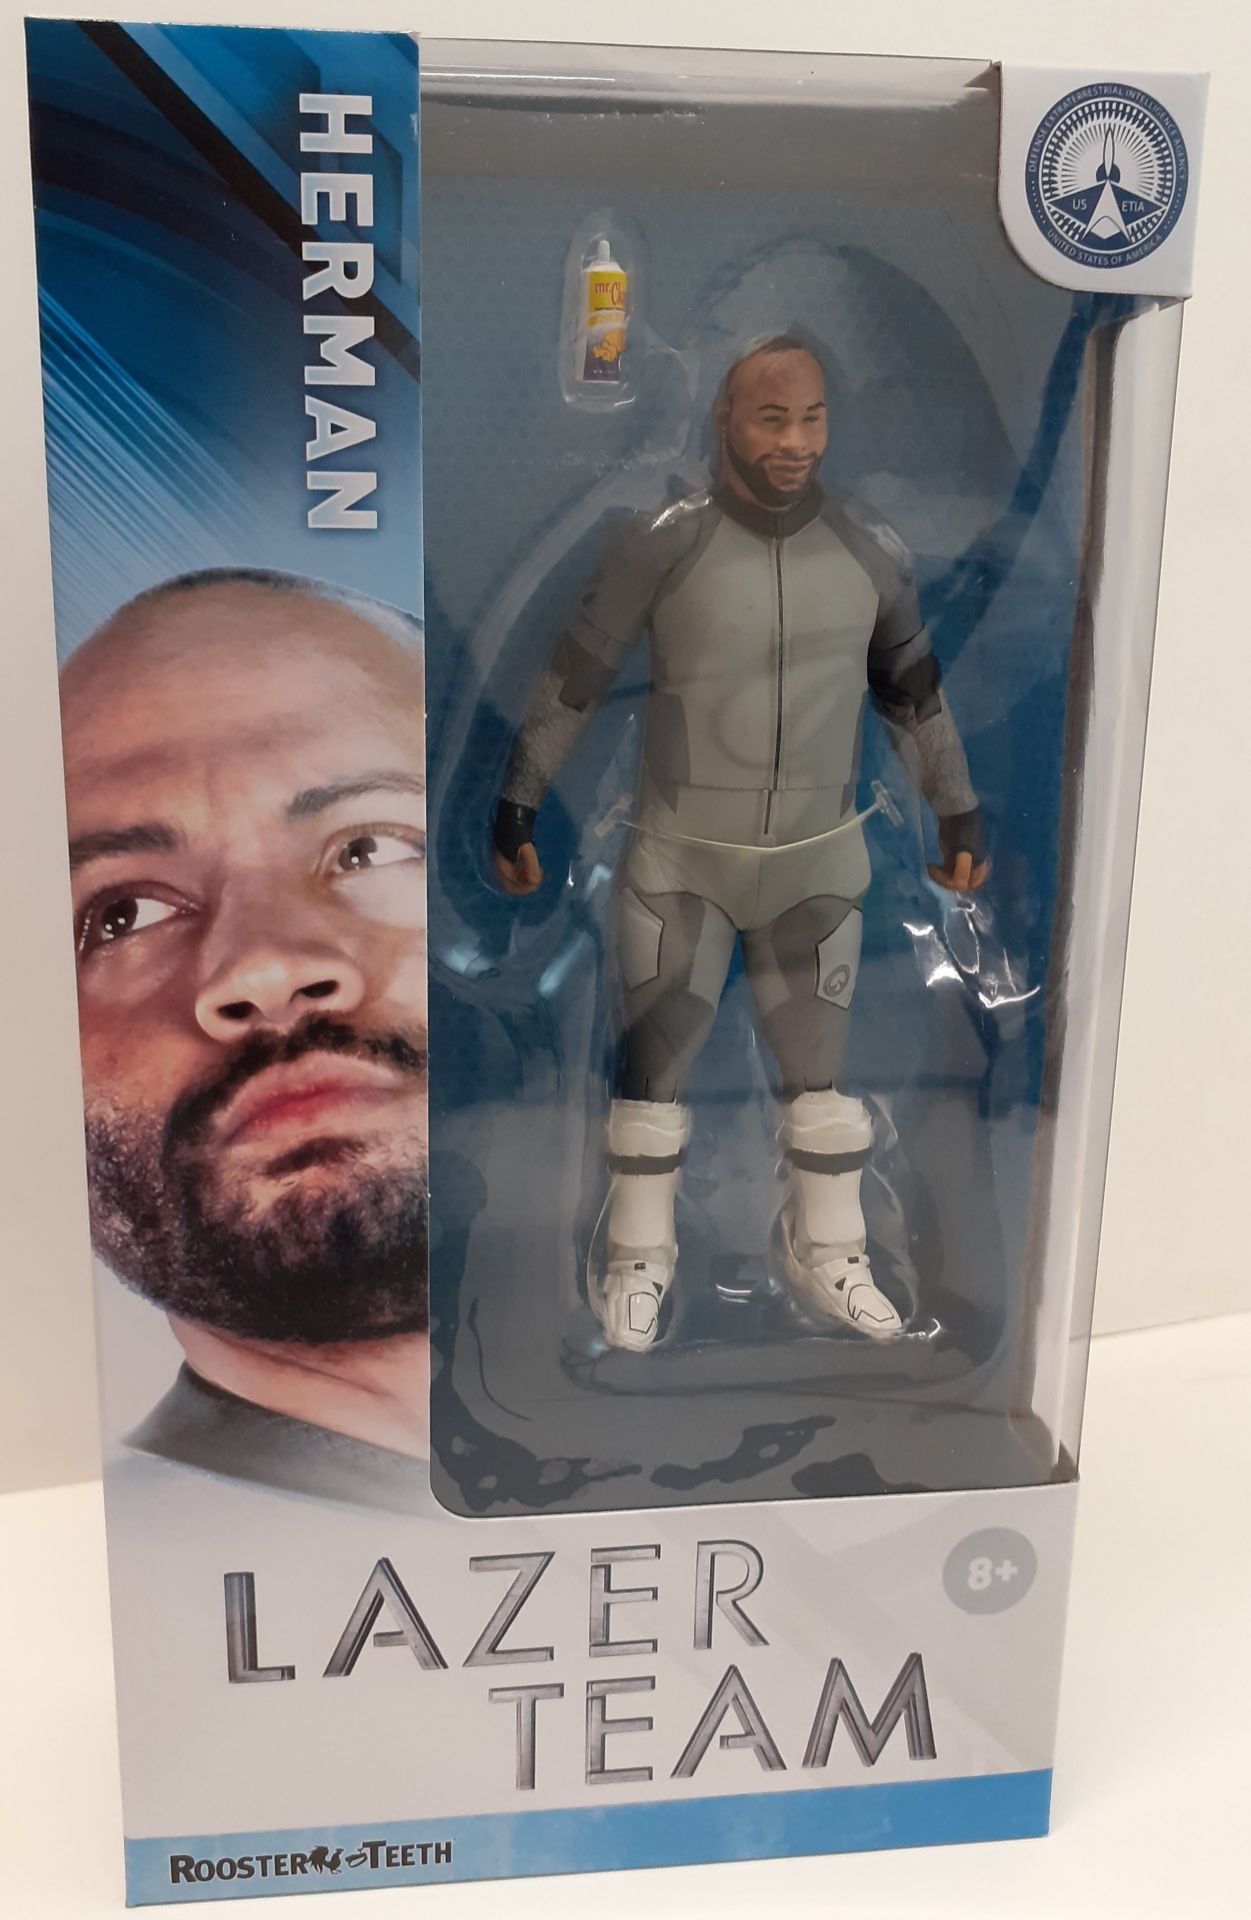 X 20 BRAND NEW RARE LAZER TEAM ROOSTER TEETH HERMAN FIGURES, INDIVIDUALLY SEALED. TOTAL RRP £379.80